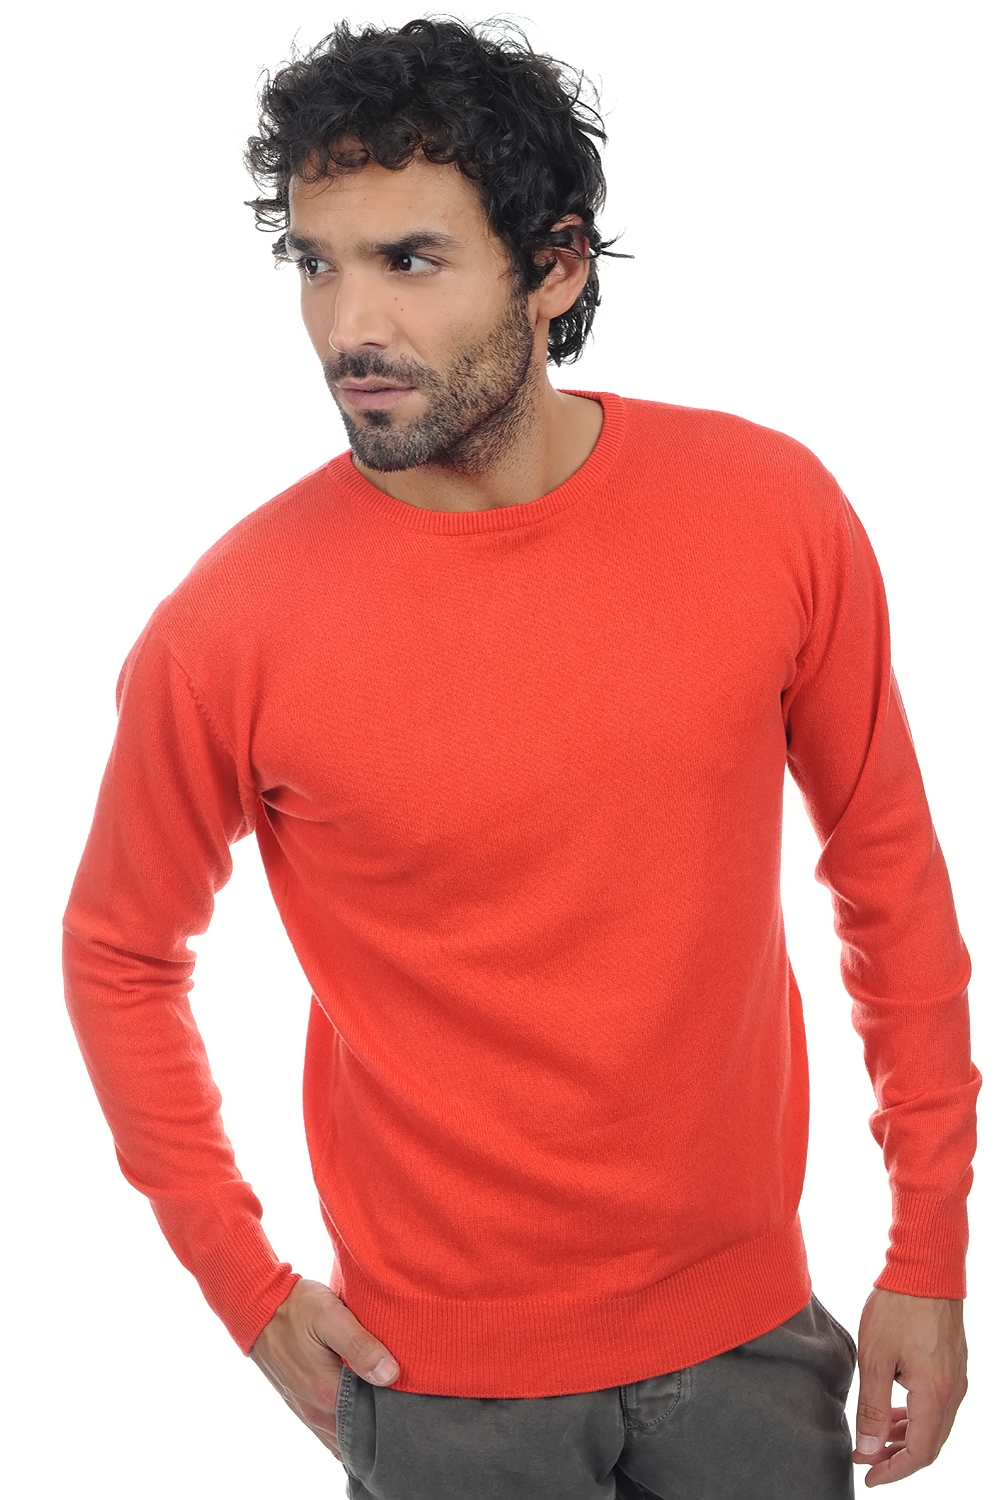 Cachemire pull homme col rond keaton corail lumineux 3xl